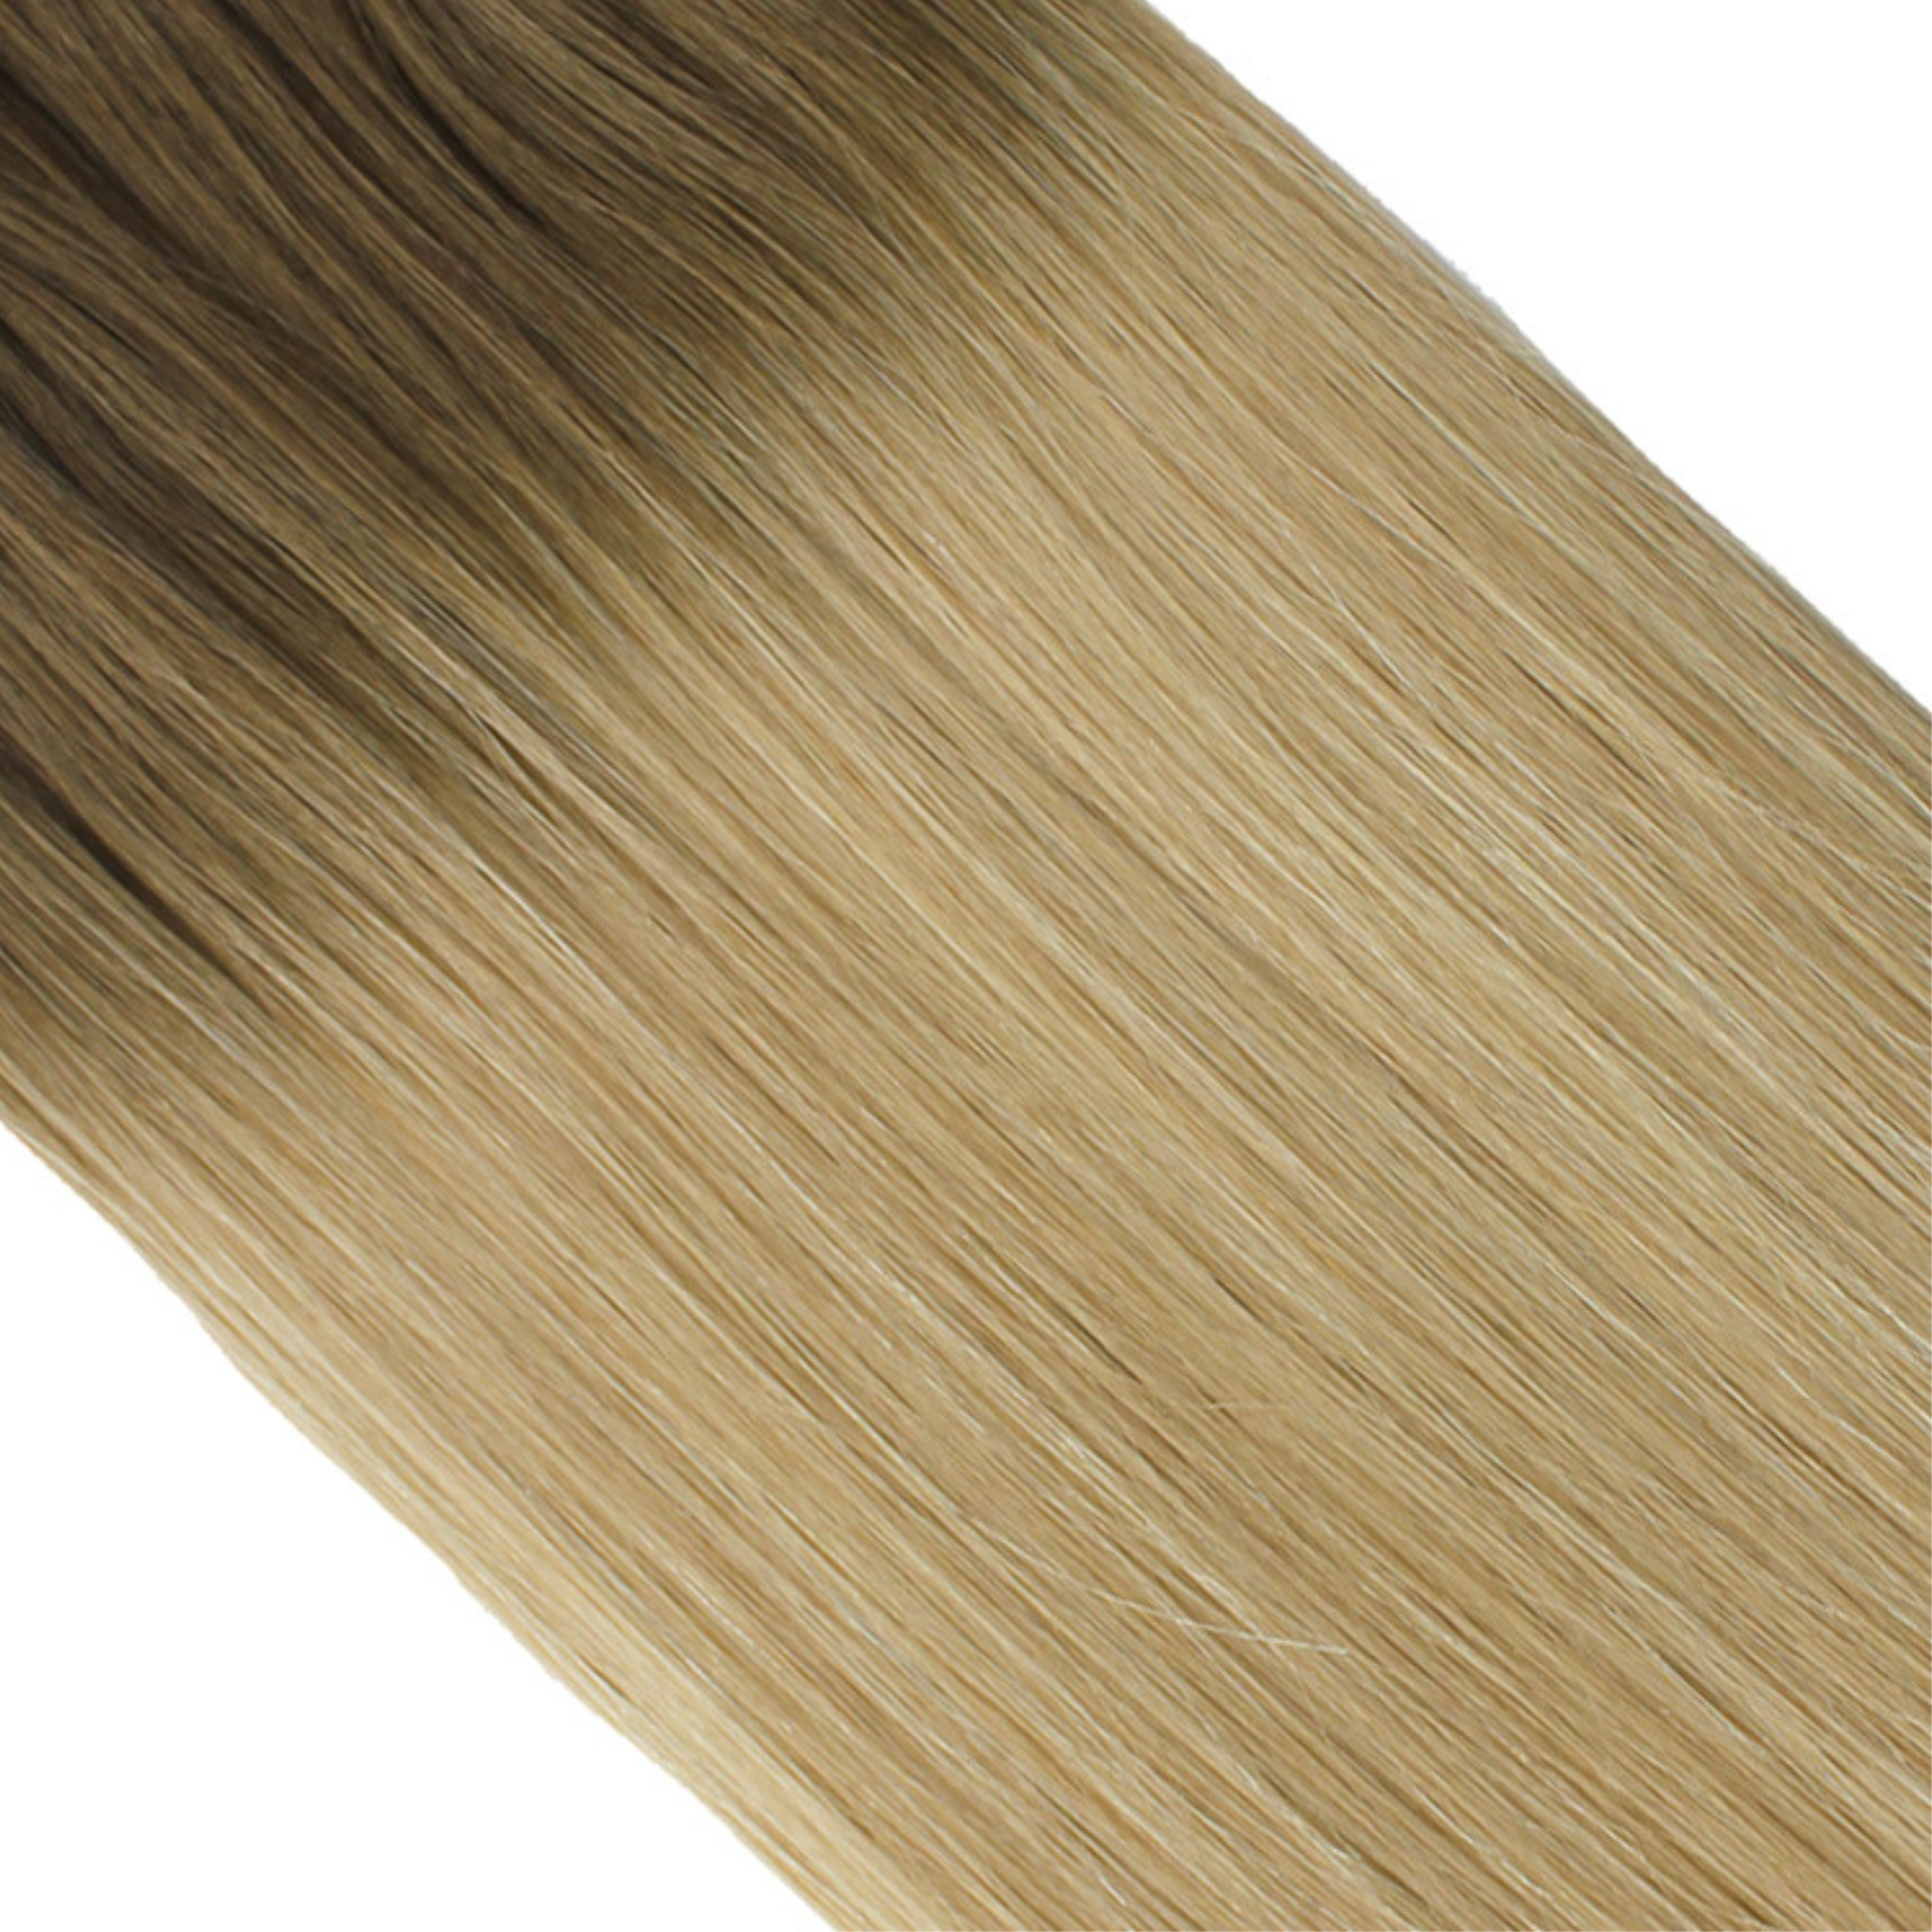 "hair rehab london 24" length 280 grams weight ultimate clip-in hair extensions shade titled rooted dirty blonde"